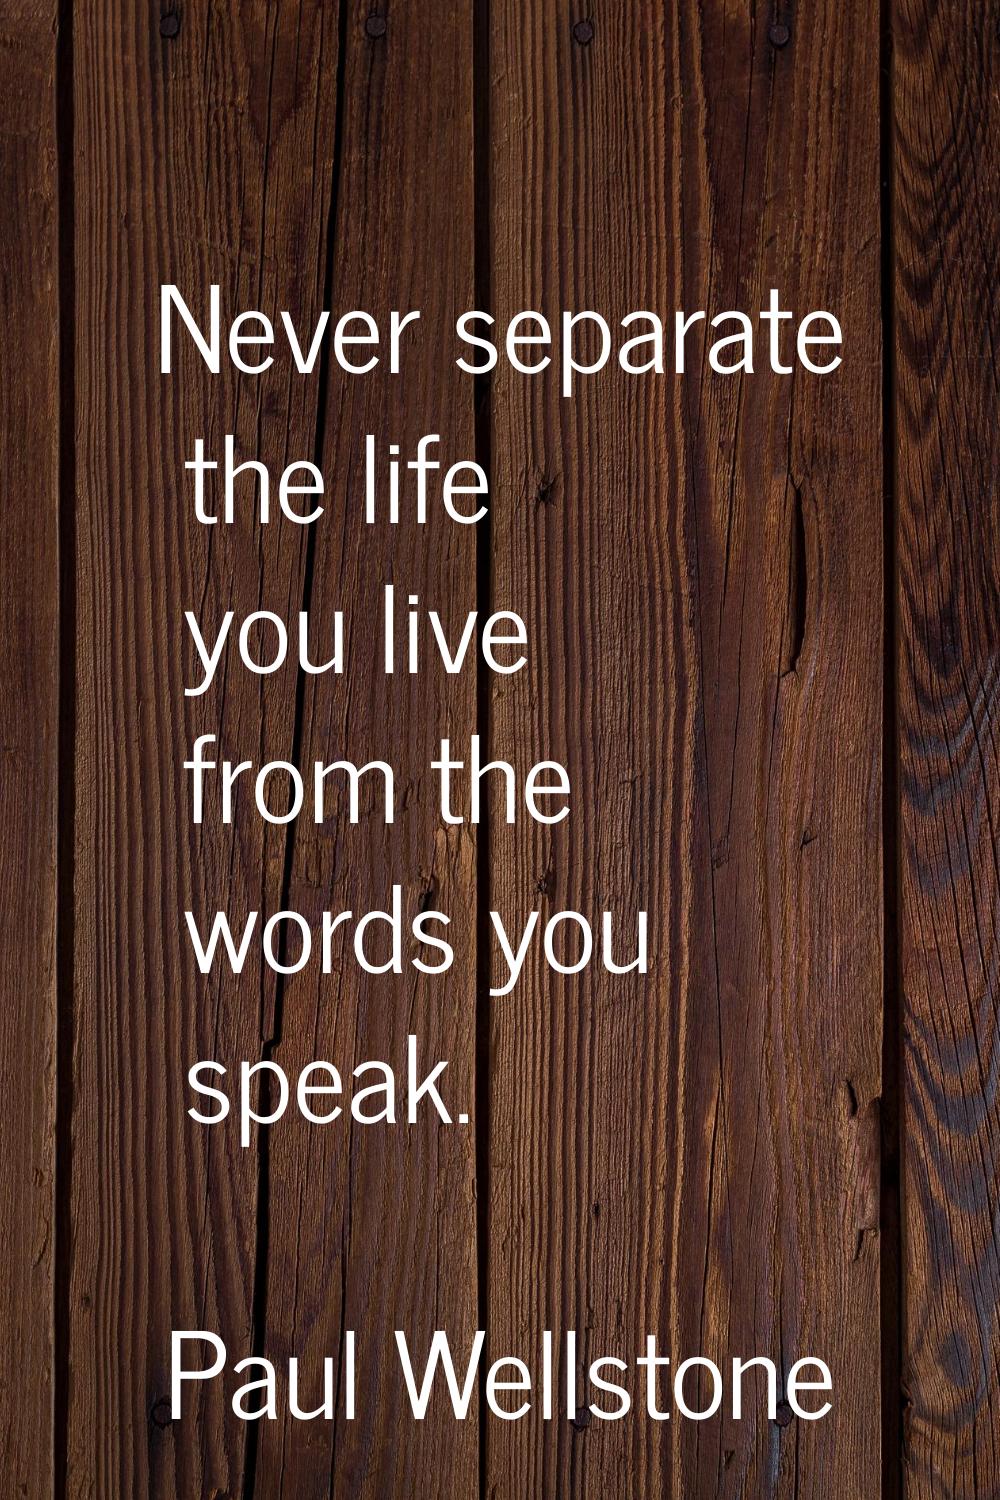 Never separate the life you live from the words you speak.